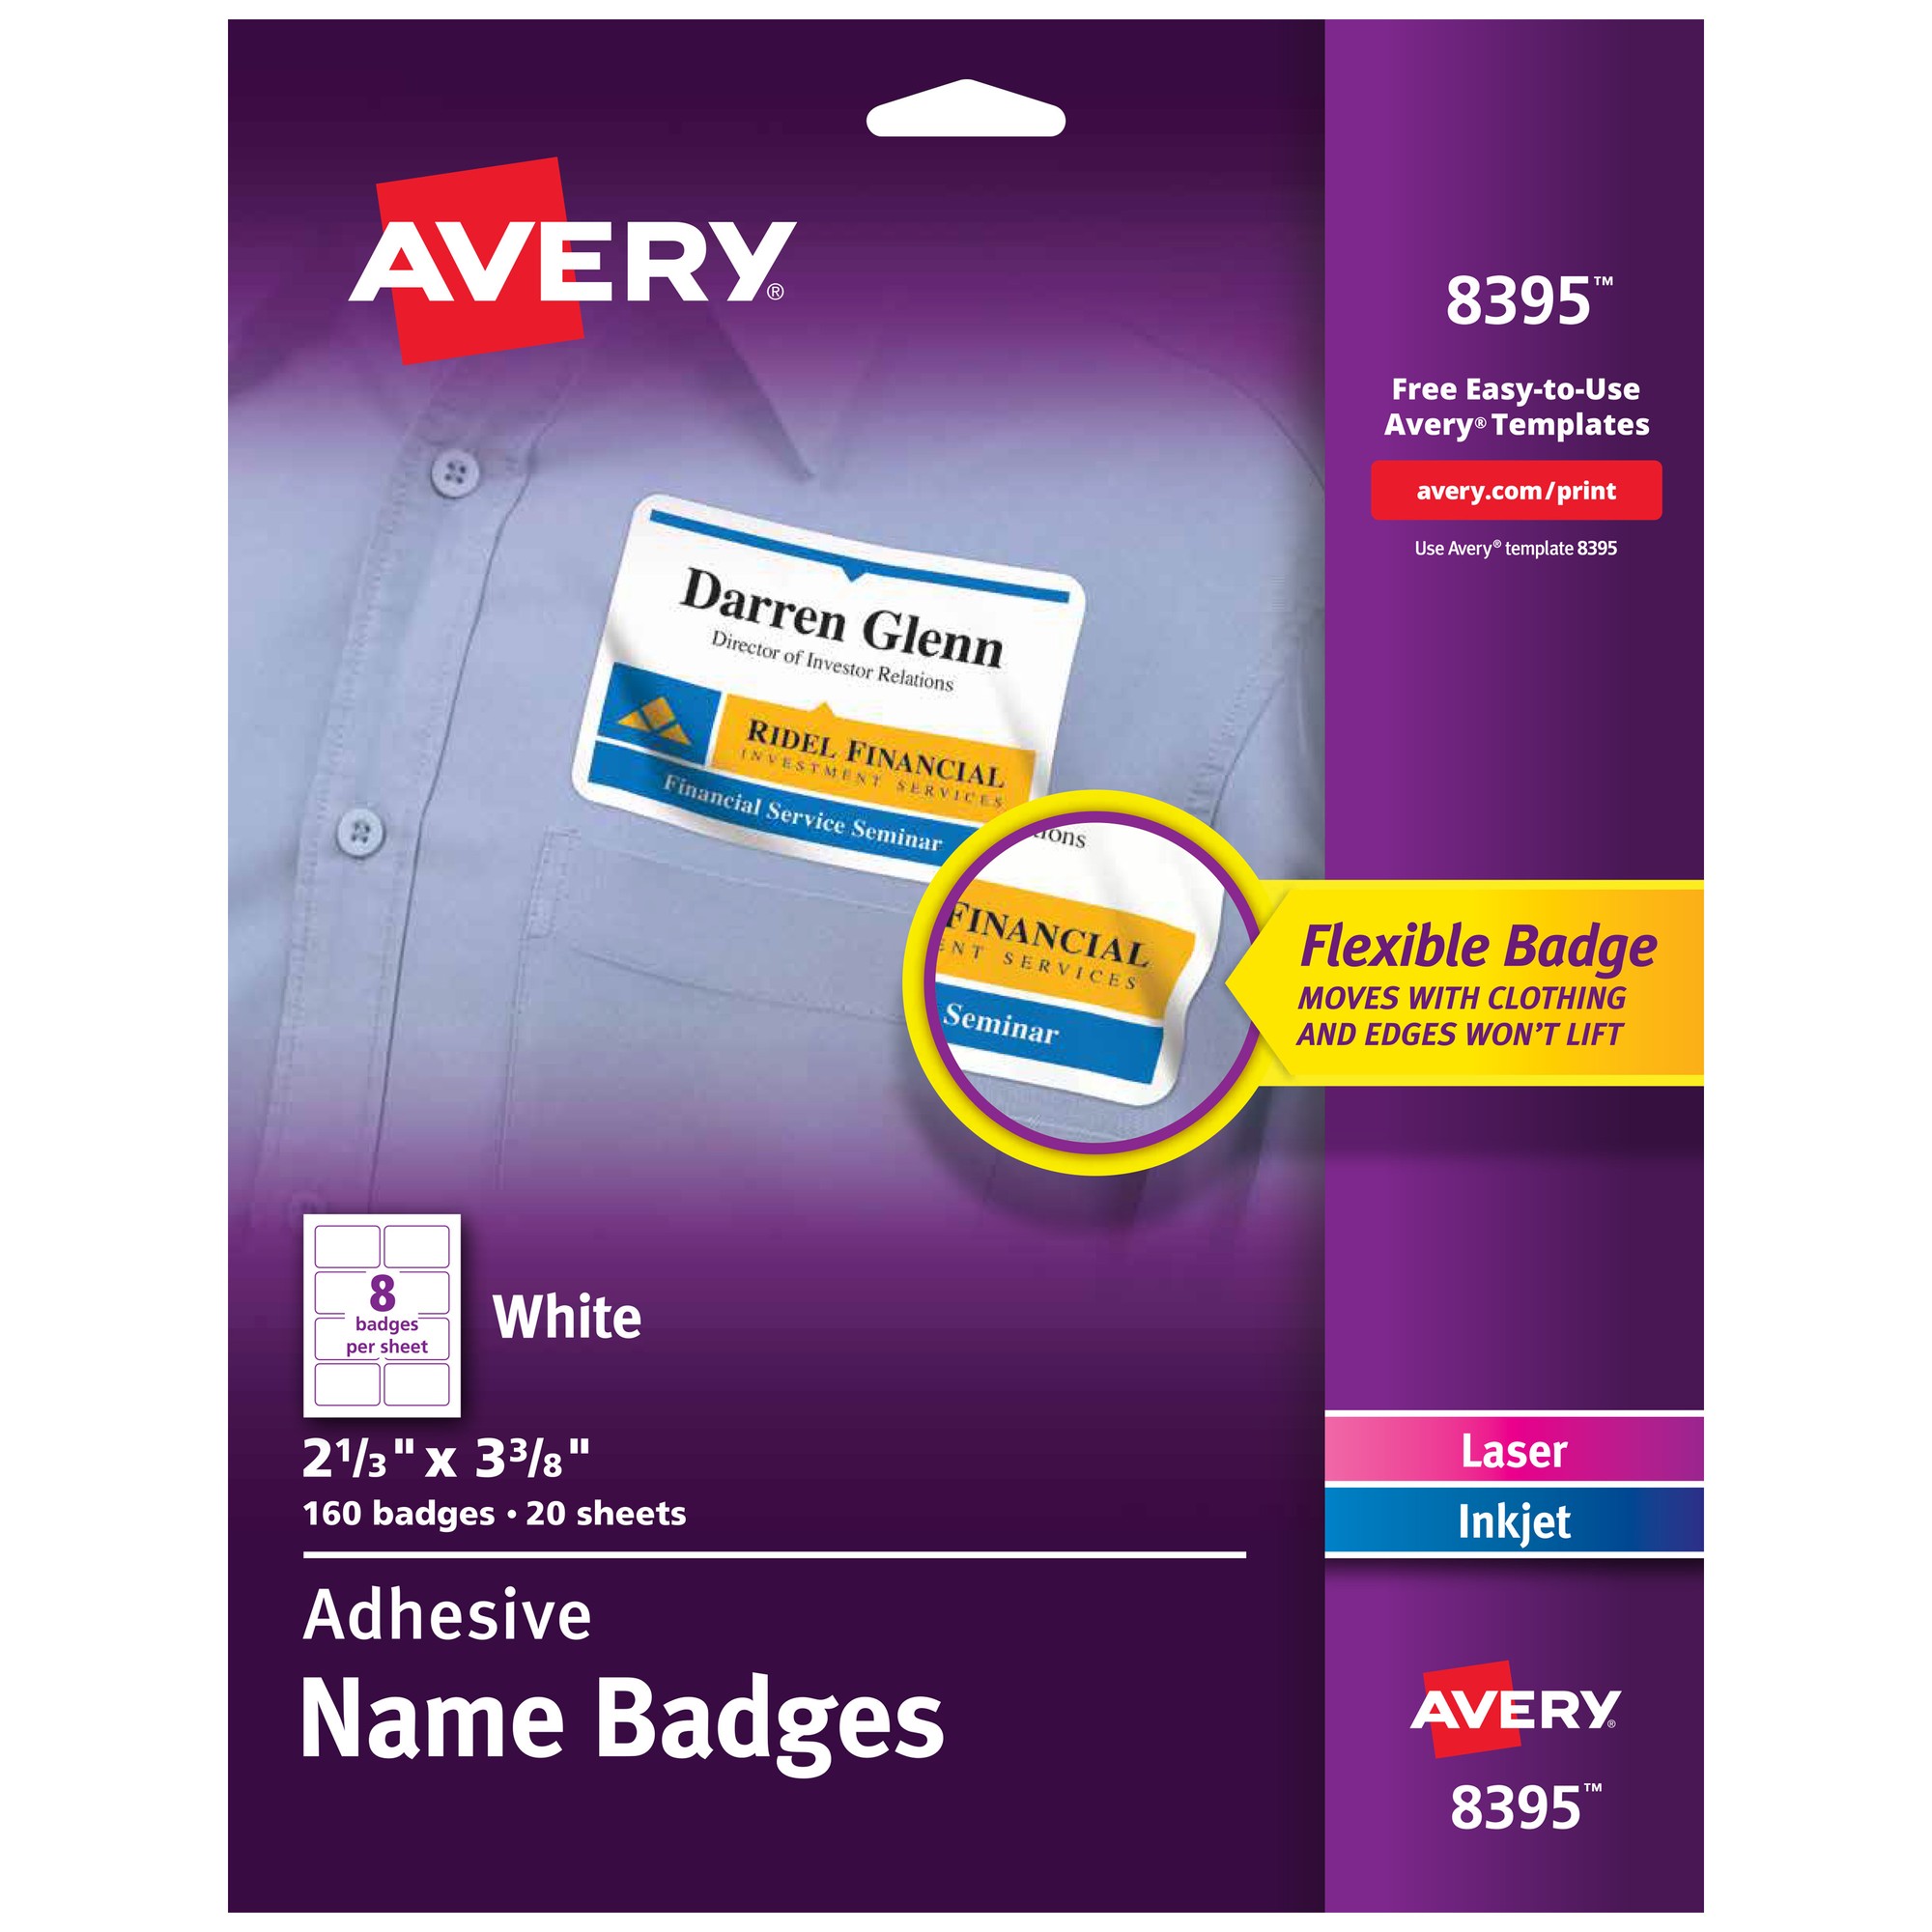 Avery Adhesive Name Badges - 2 21/64" Width x 3 3/8" Length - Removable Adhesive - Rectangle - Laser, Inkjet - White - Film